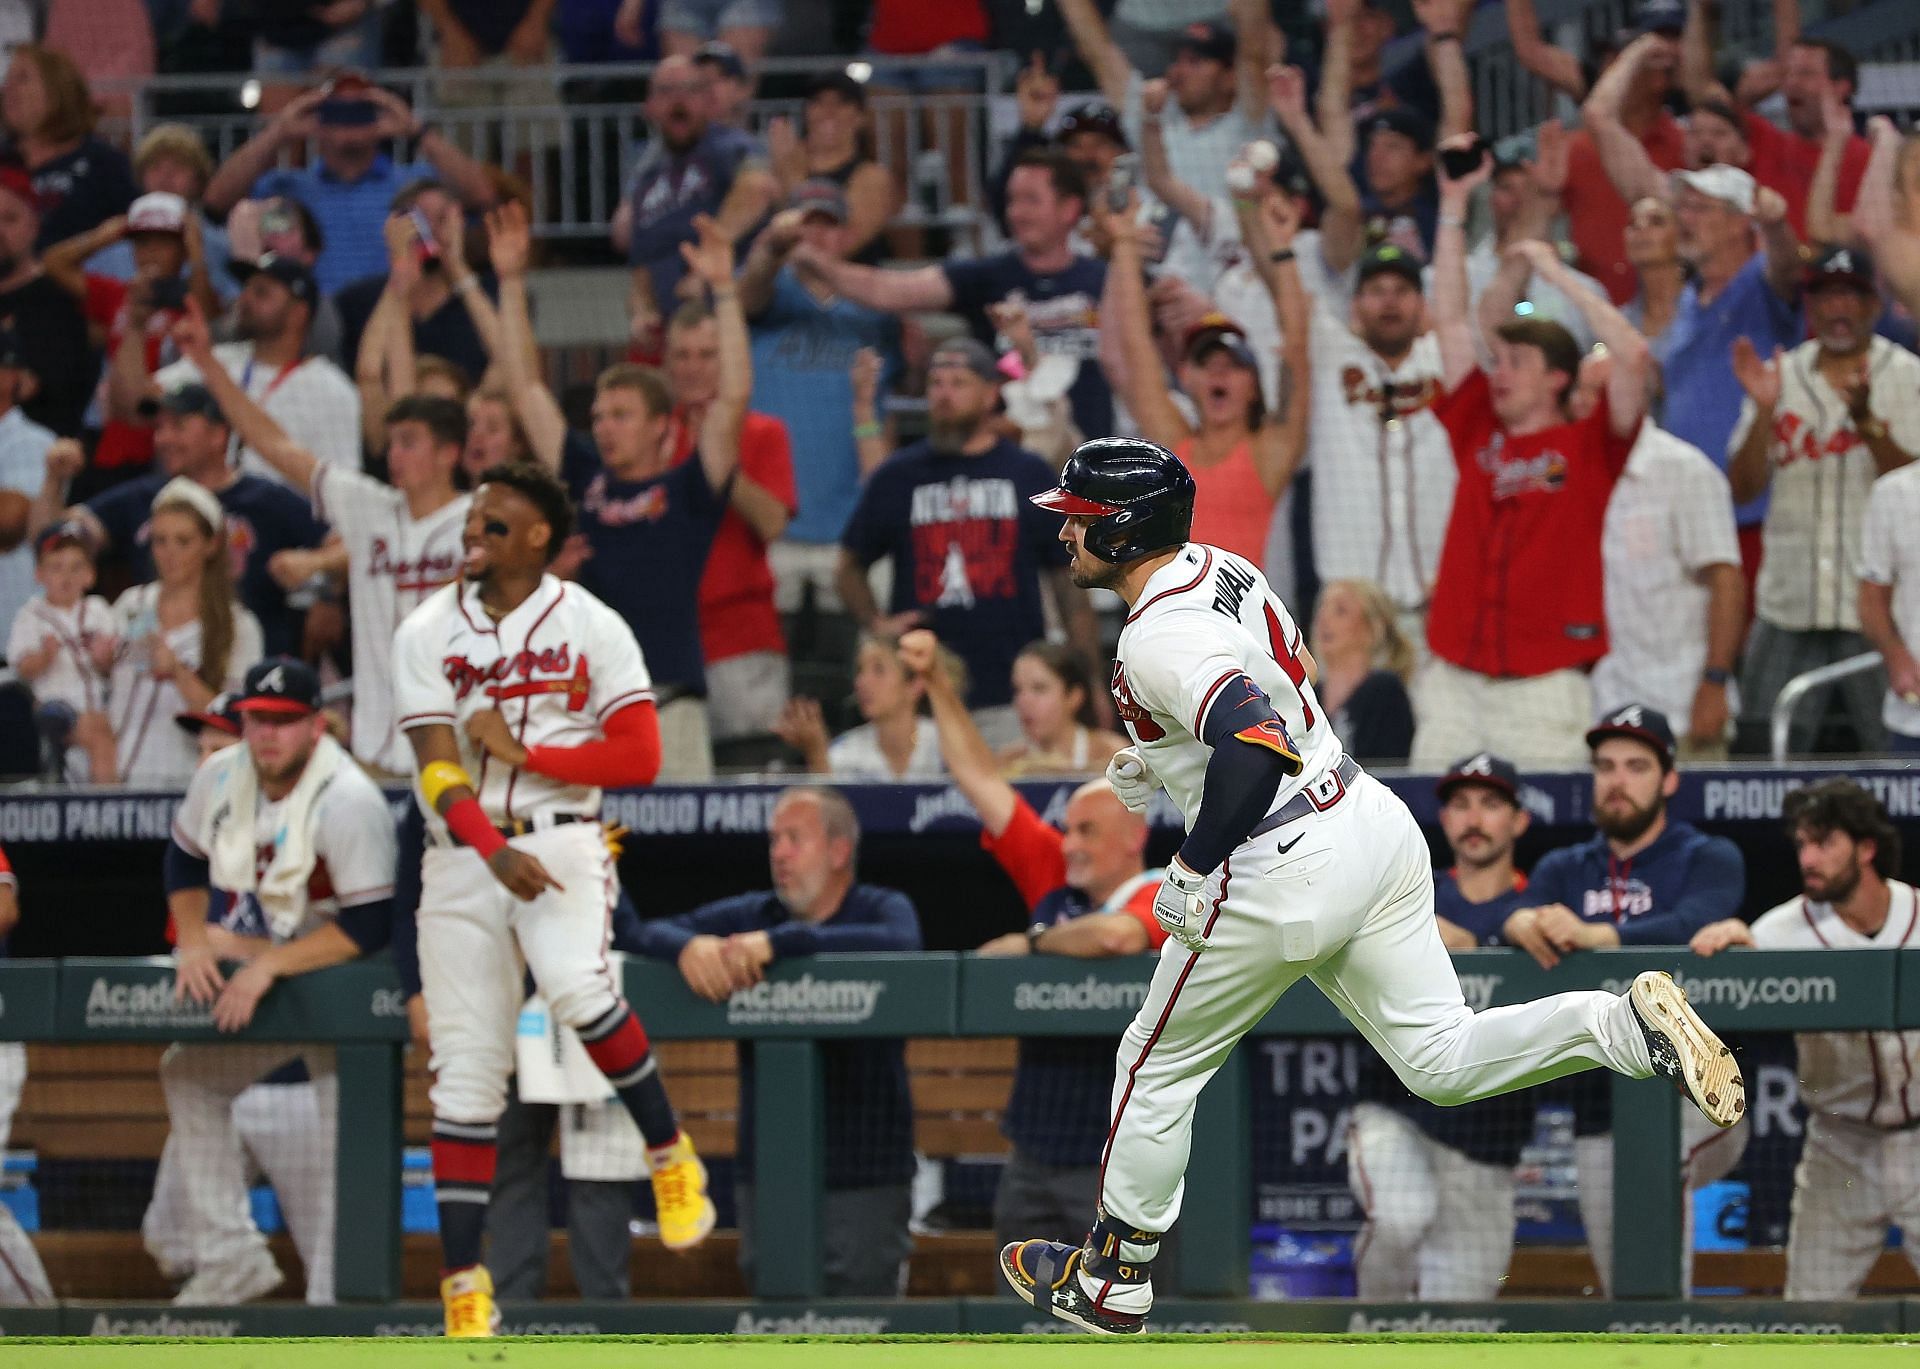 The Atlanta Braves lose in extra innings once again.